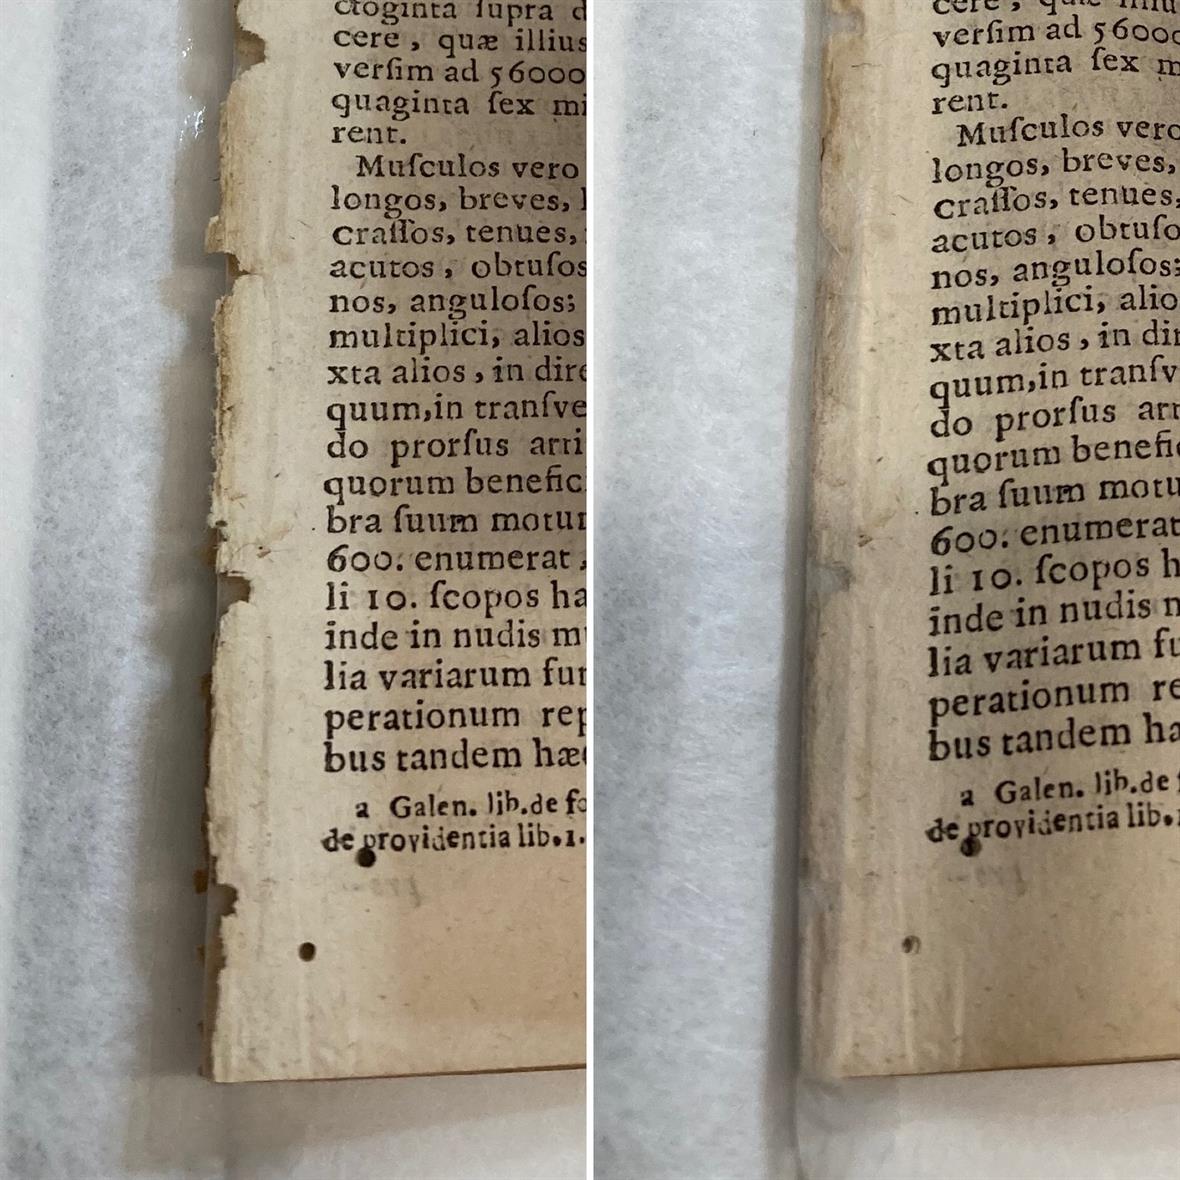 Images of losses in the paper sheets, and how they look filled with replacement papers.